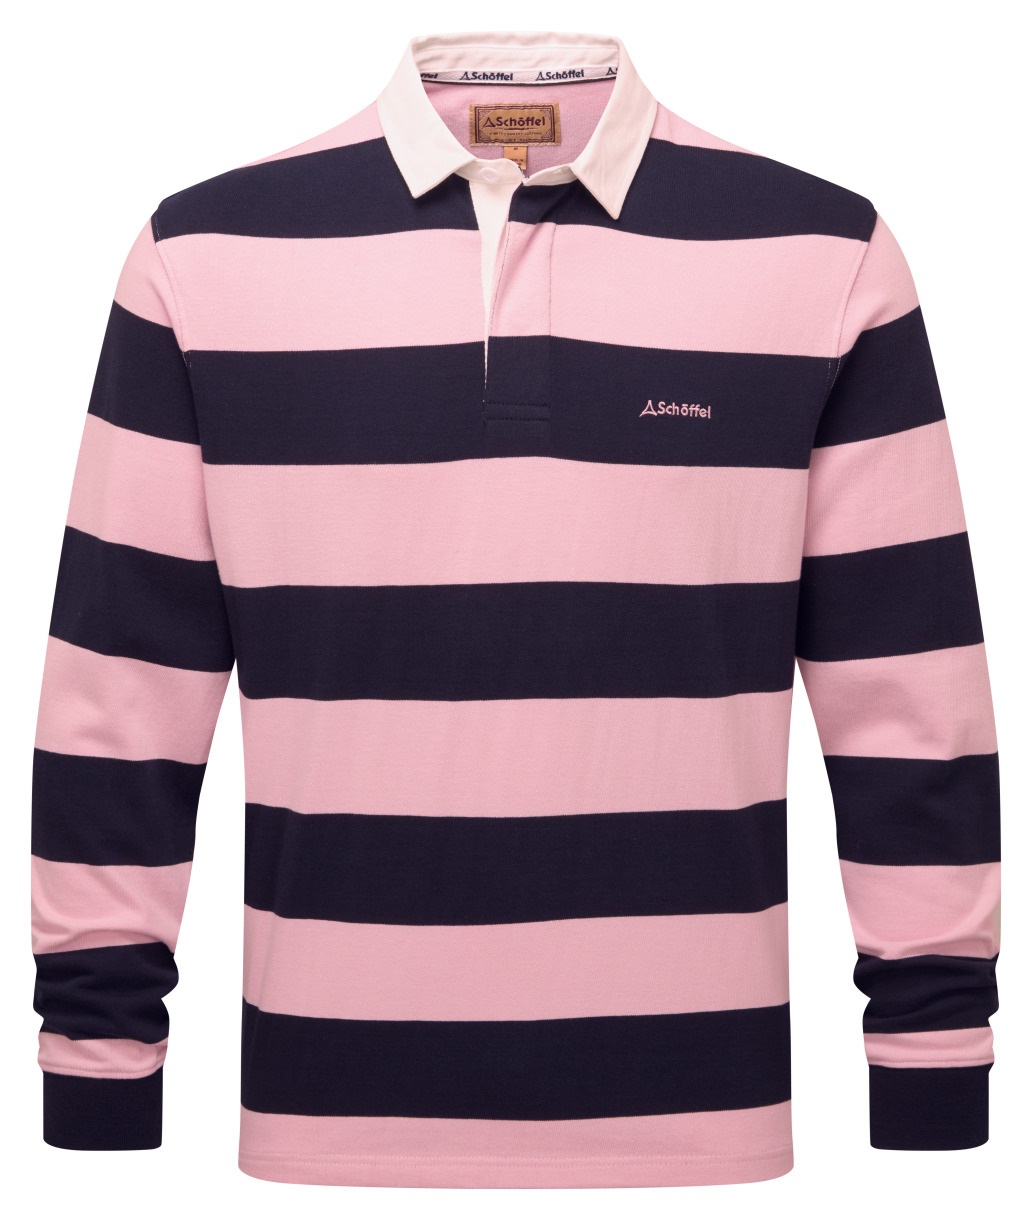 Schoffel St Mawes Rugby Shirt Navy/Pink